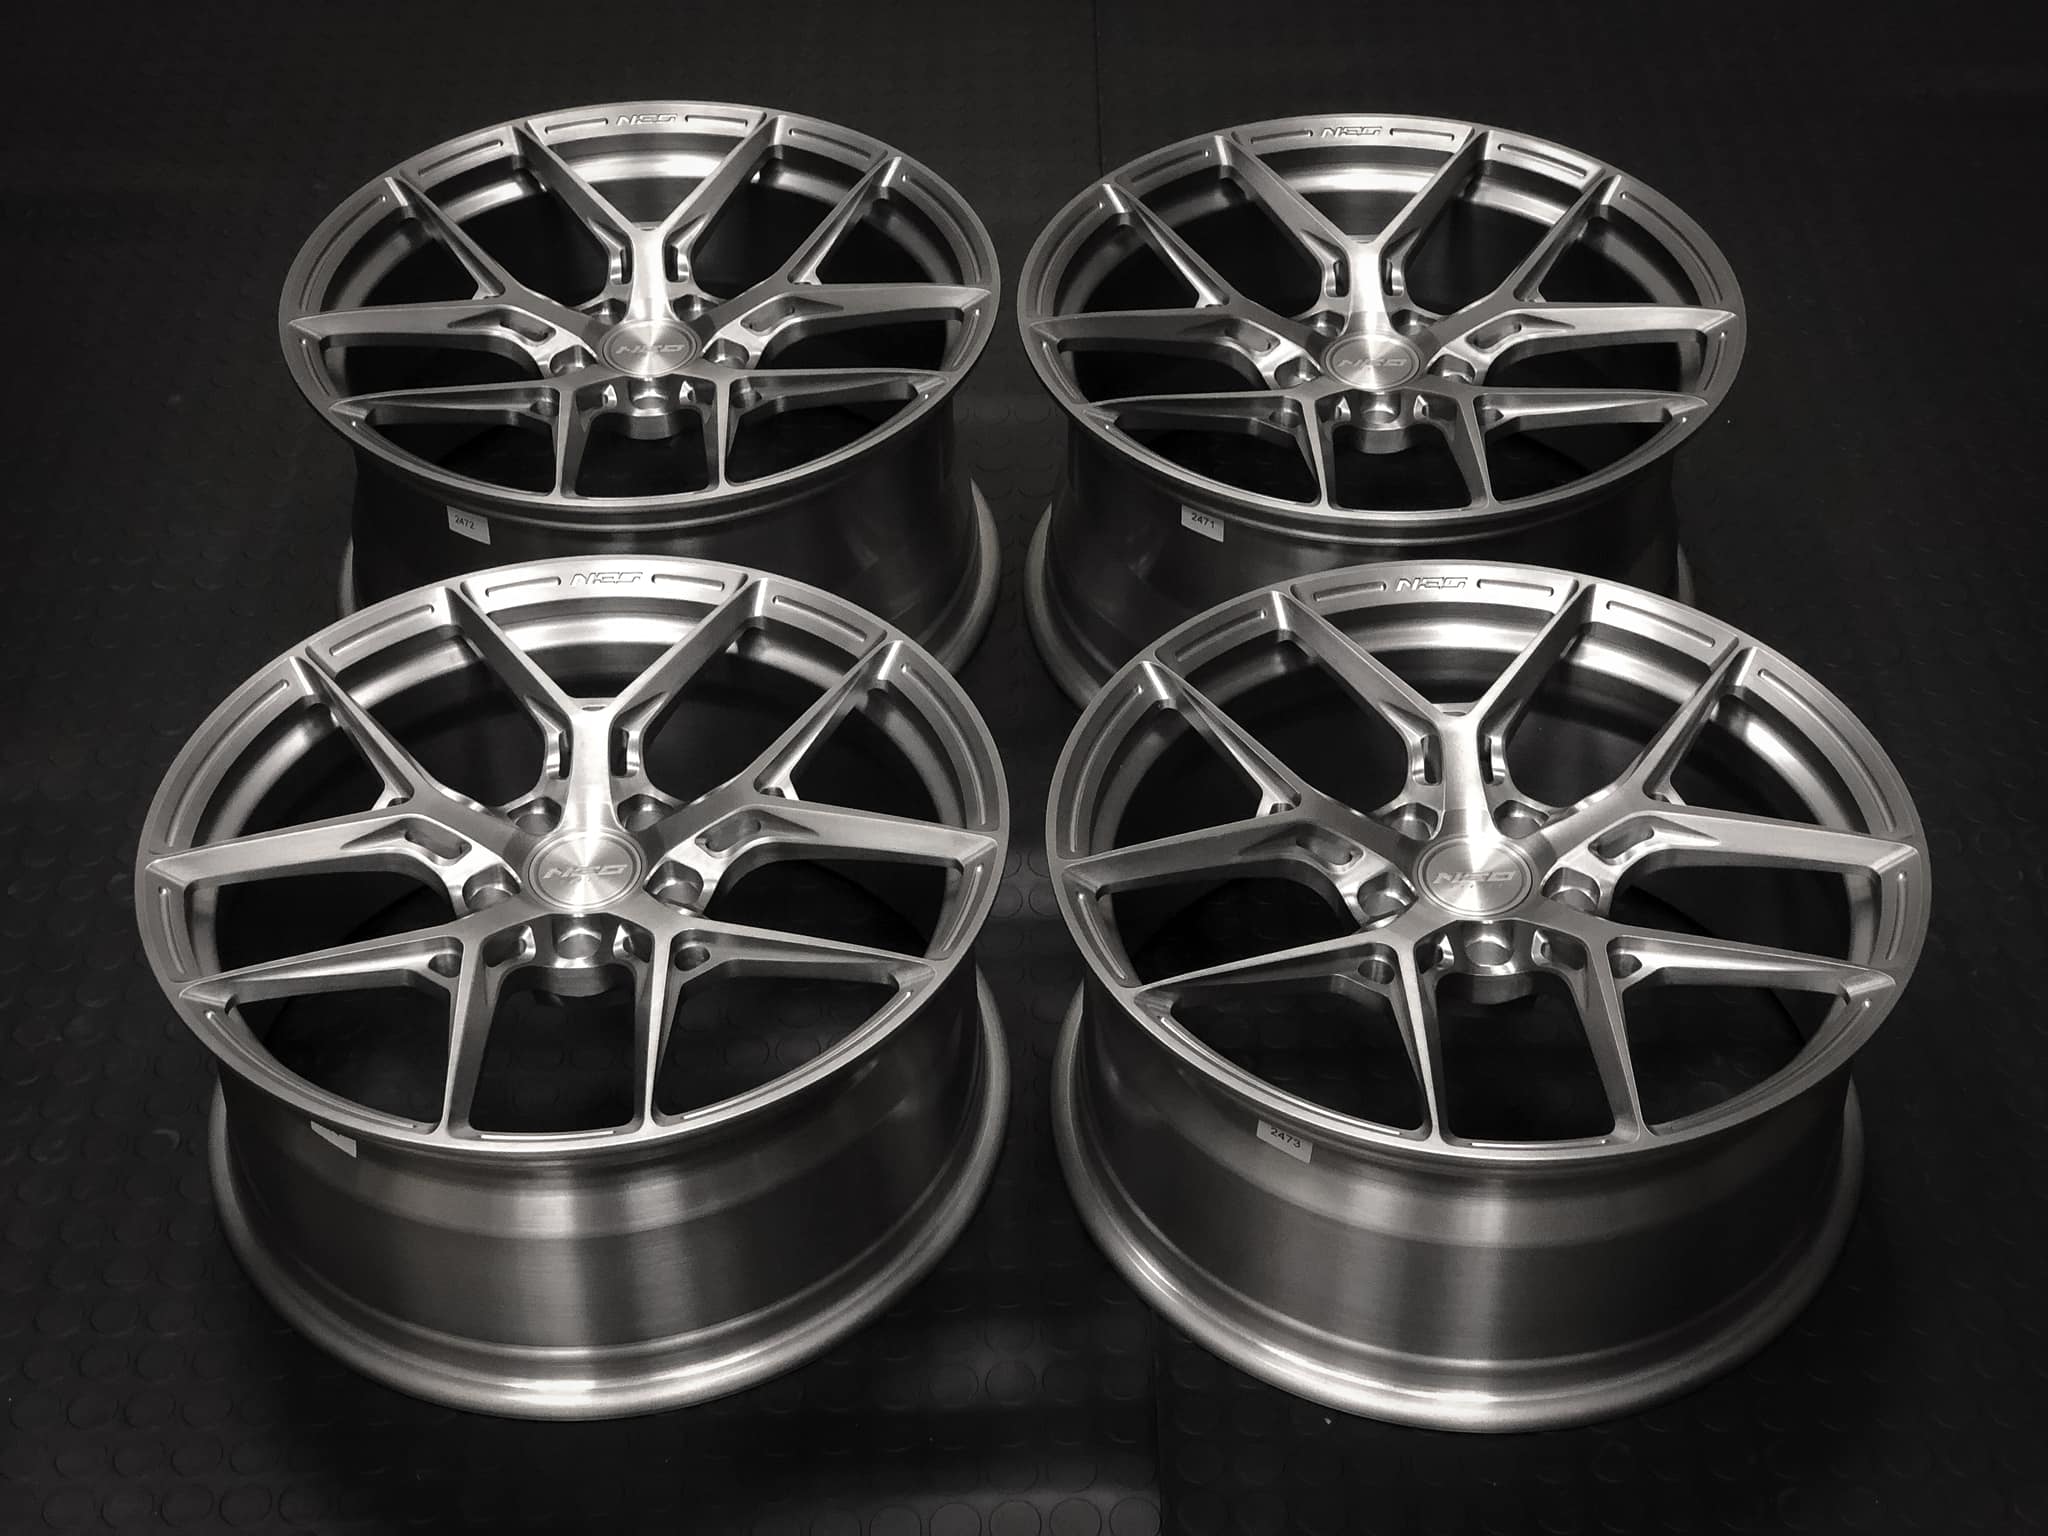 S650 Mustang New** NES Forged Wheels by MRR Design 1pc and 2pc 50919659_2275829902674373_7716535833964052480_o